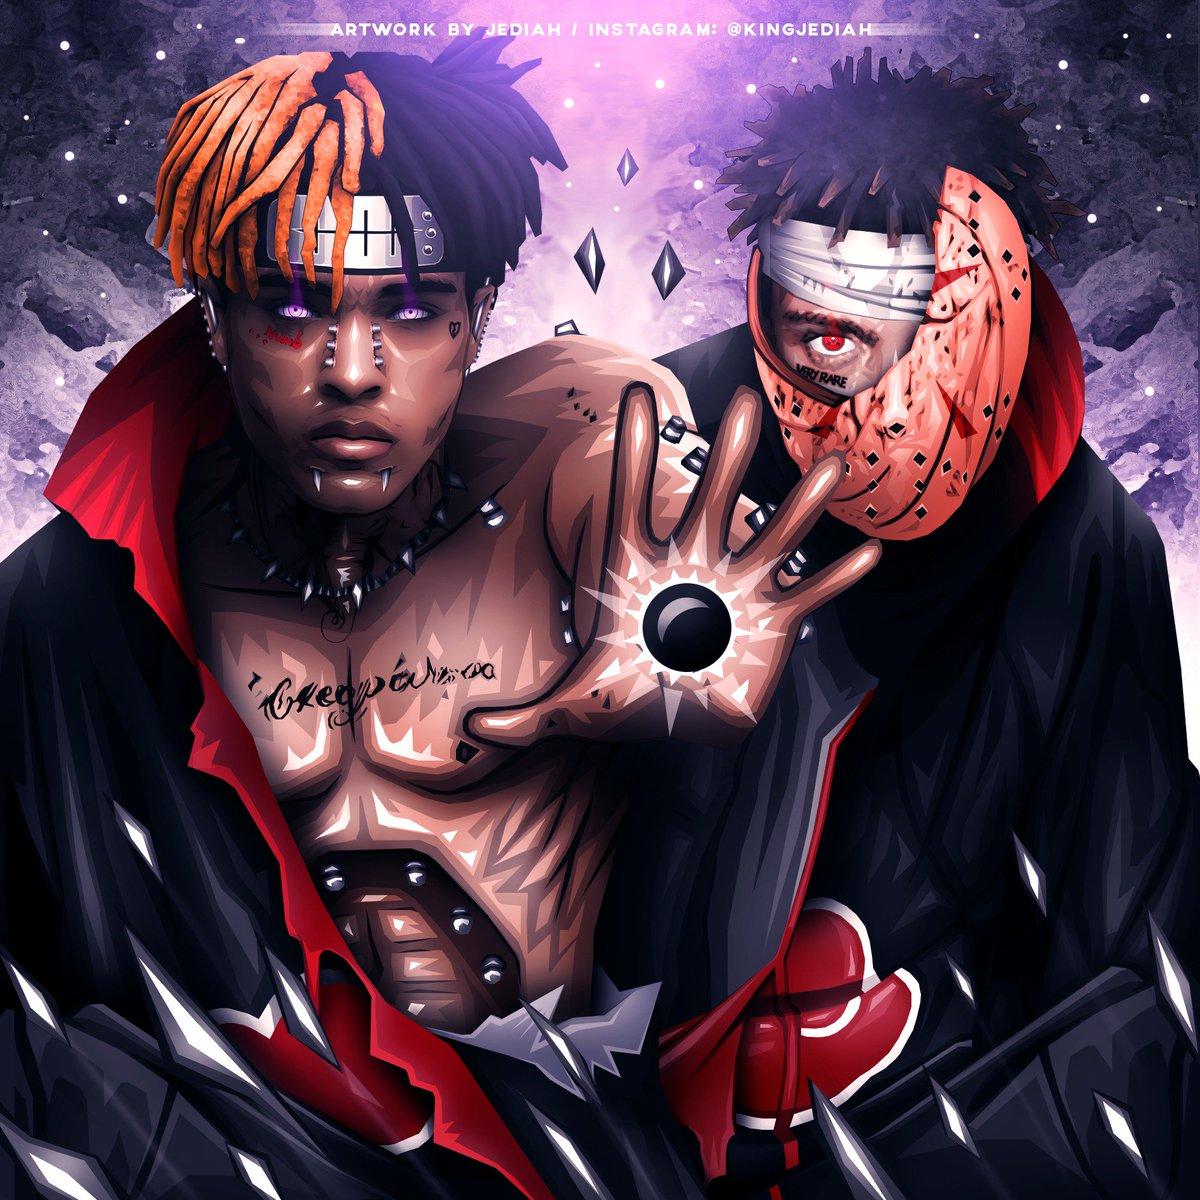 Why is there so much fan art of xxxtentacion as a naruto character